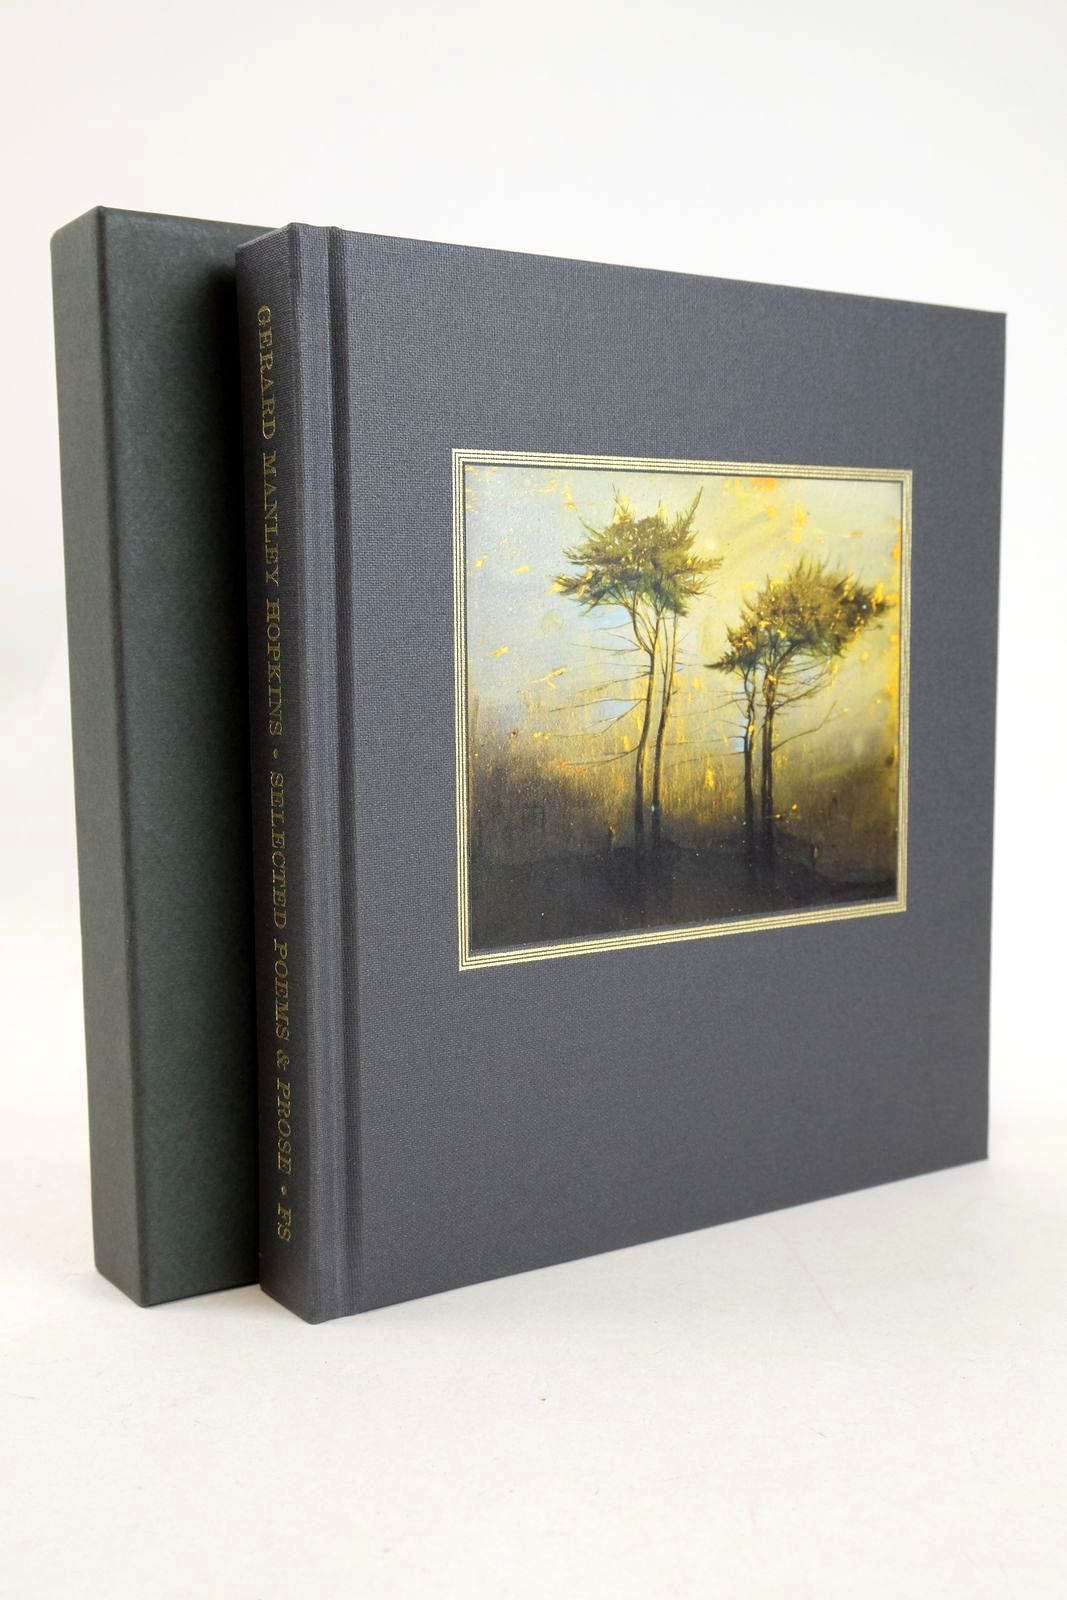 Photo of SELECTED POEMS AND PROSE written by Hopkins, Gerard Manley Padel, Ruth illustrated by Magill, Elizabeth published by Folio Society (STOCK CODE: 1327592)  for sale by Stella & Rose's Books